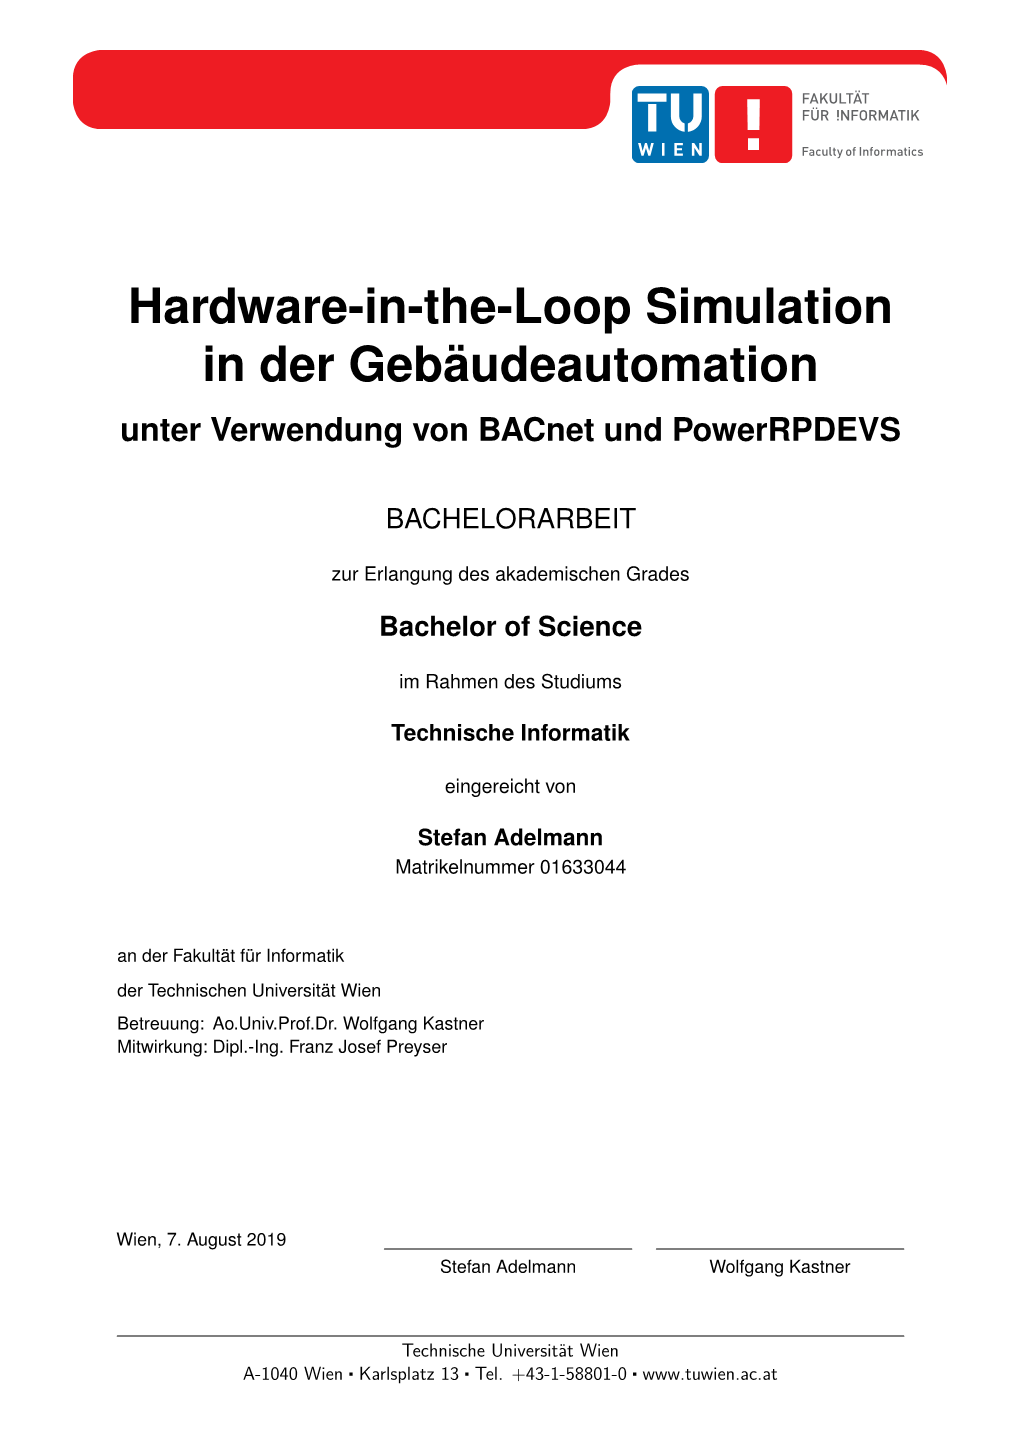 Hardware-In-The-Loop Simulation in the Domain of Building Automation Using Bacnet and Powerrpdevs